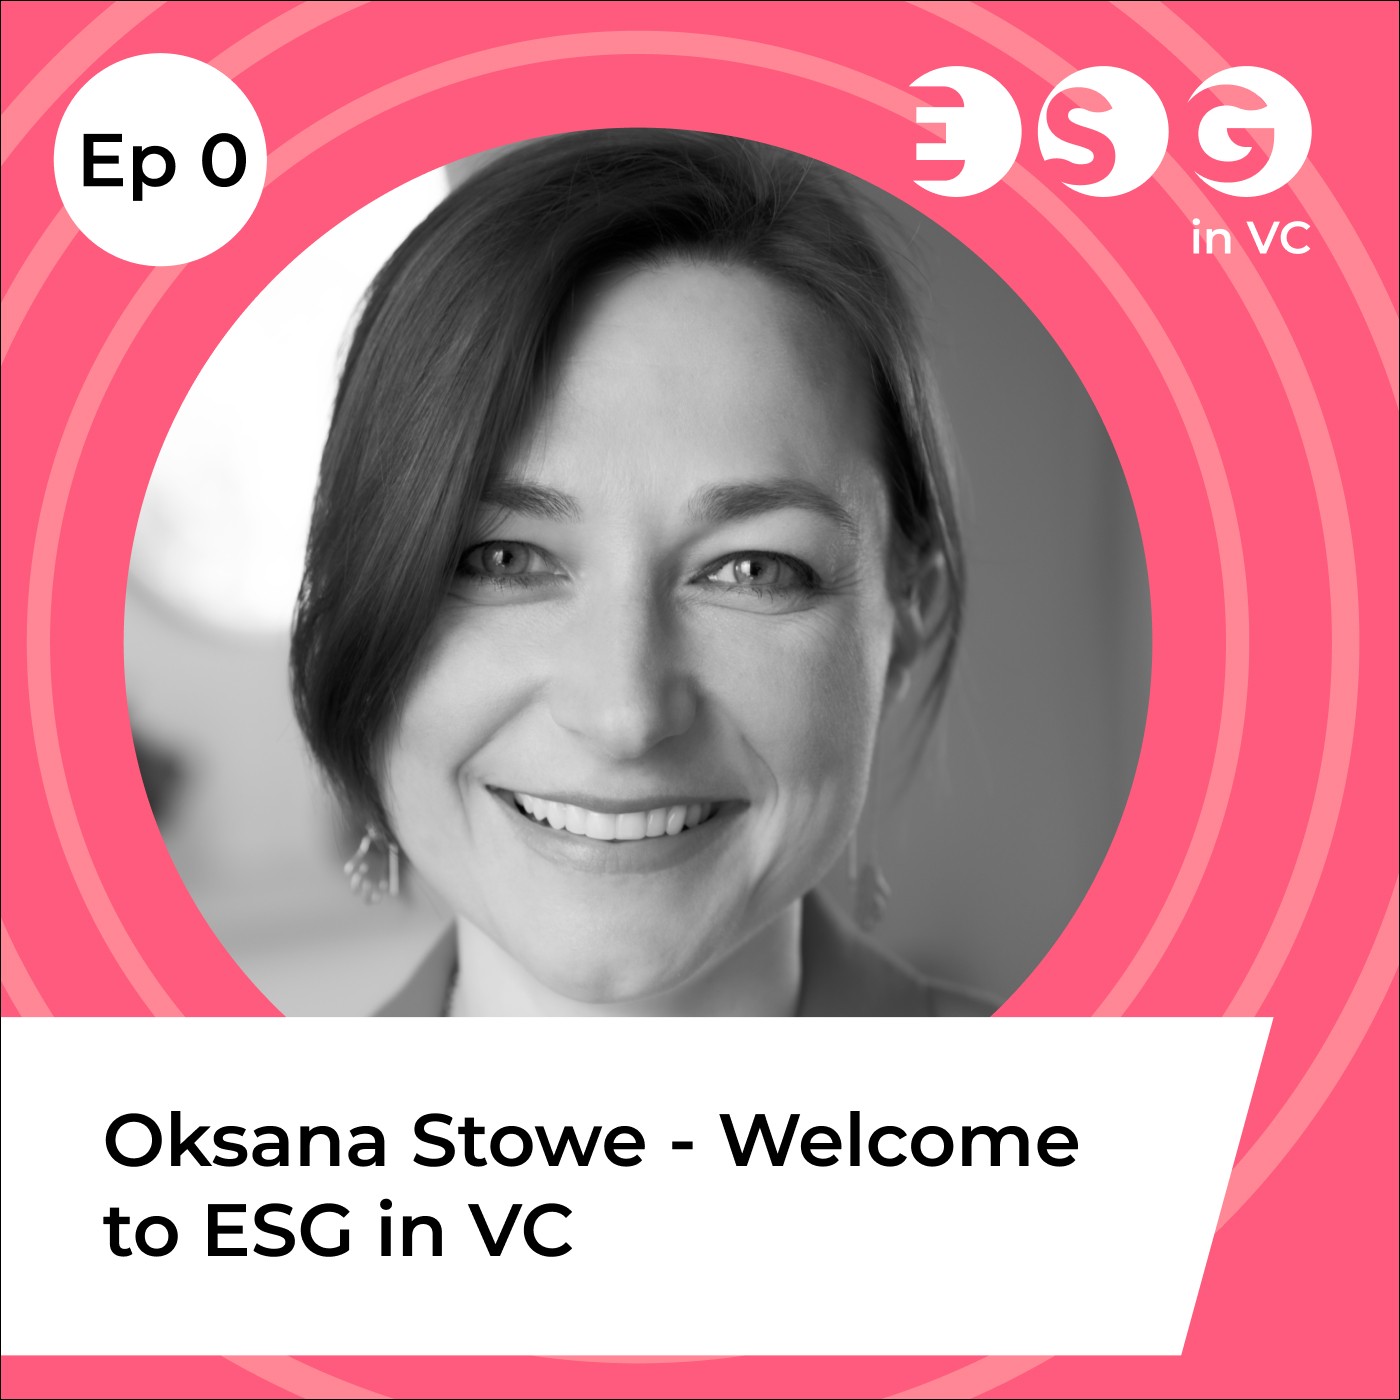 Ep 0 - Why ESG in VC